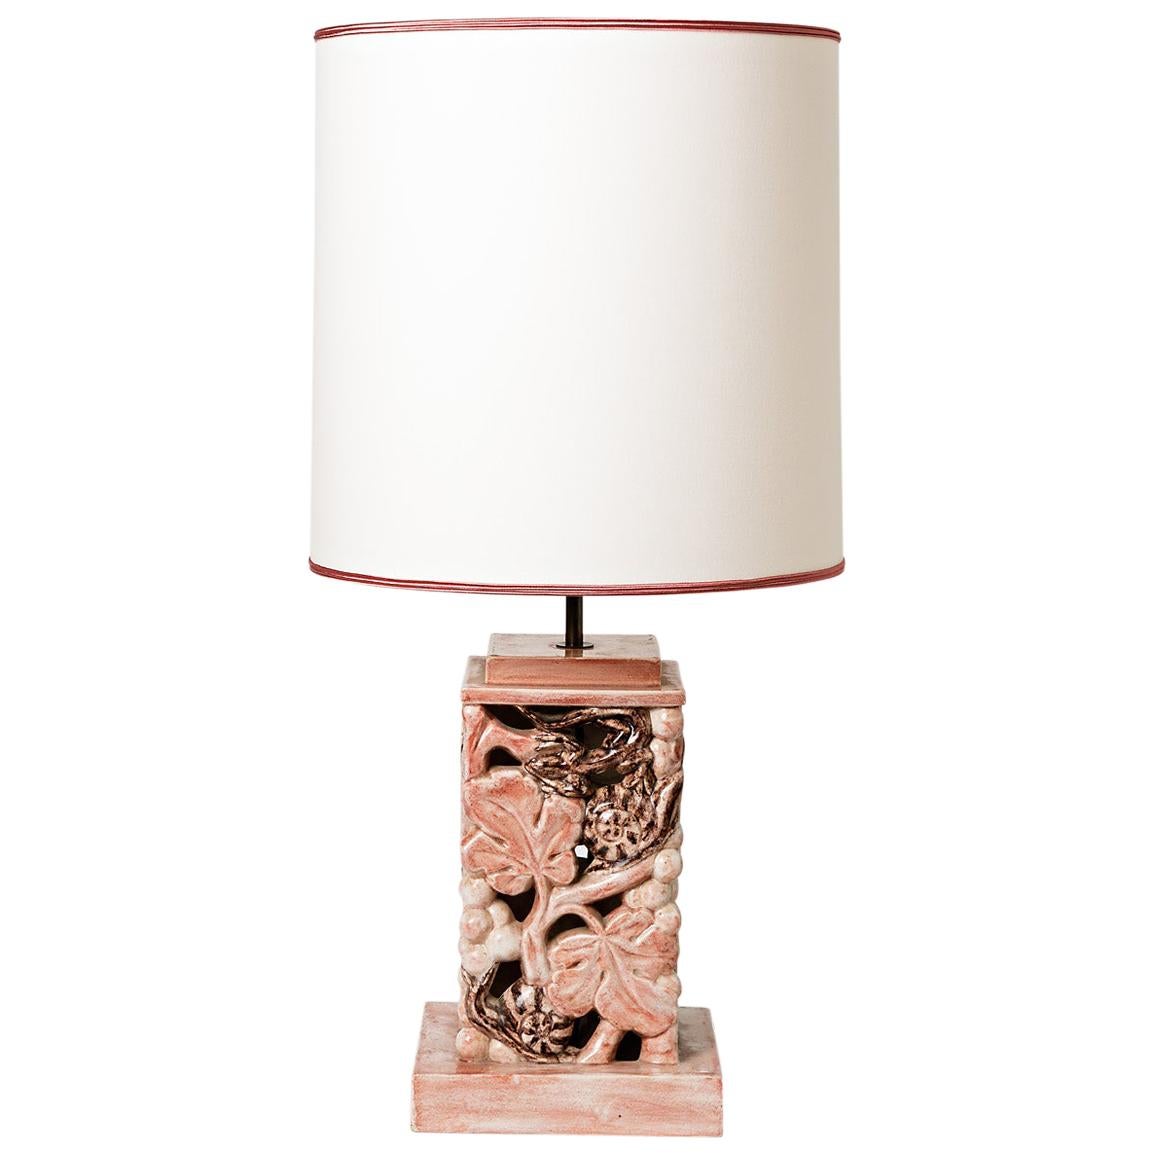 Ceramic Table Lamp with Pink Glaze Decoration, Signed, circa 1960-1970